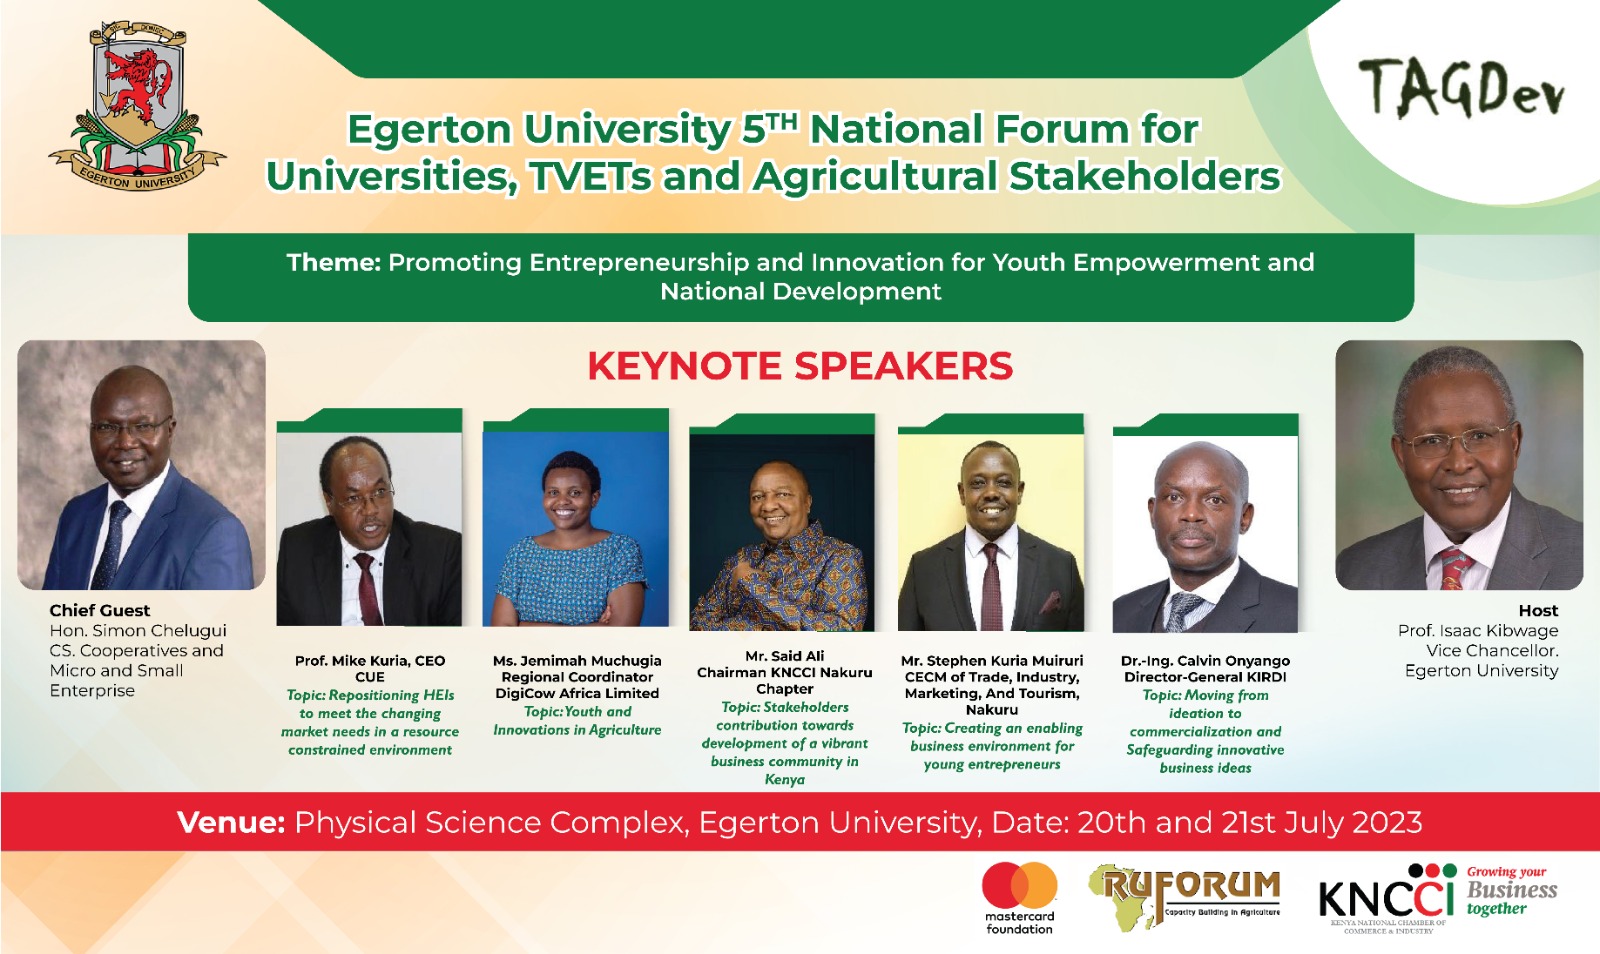 Egerton University 5th National Forum for Universities, TVETs and Agricultural Stakeholders